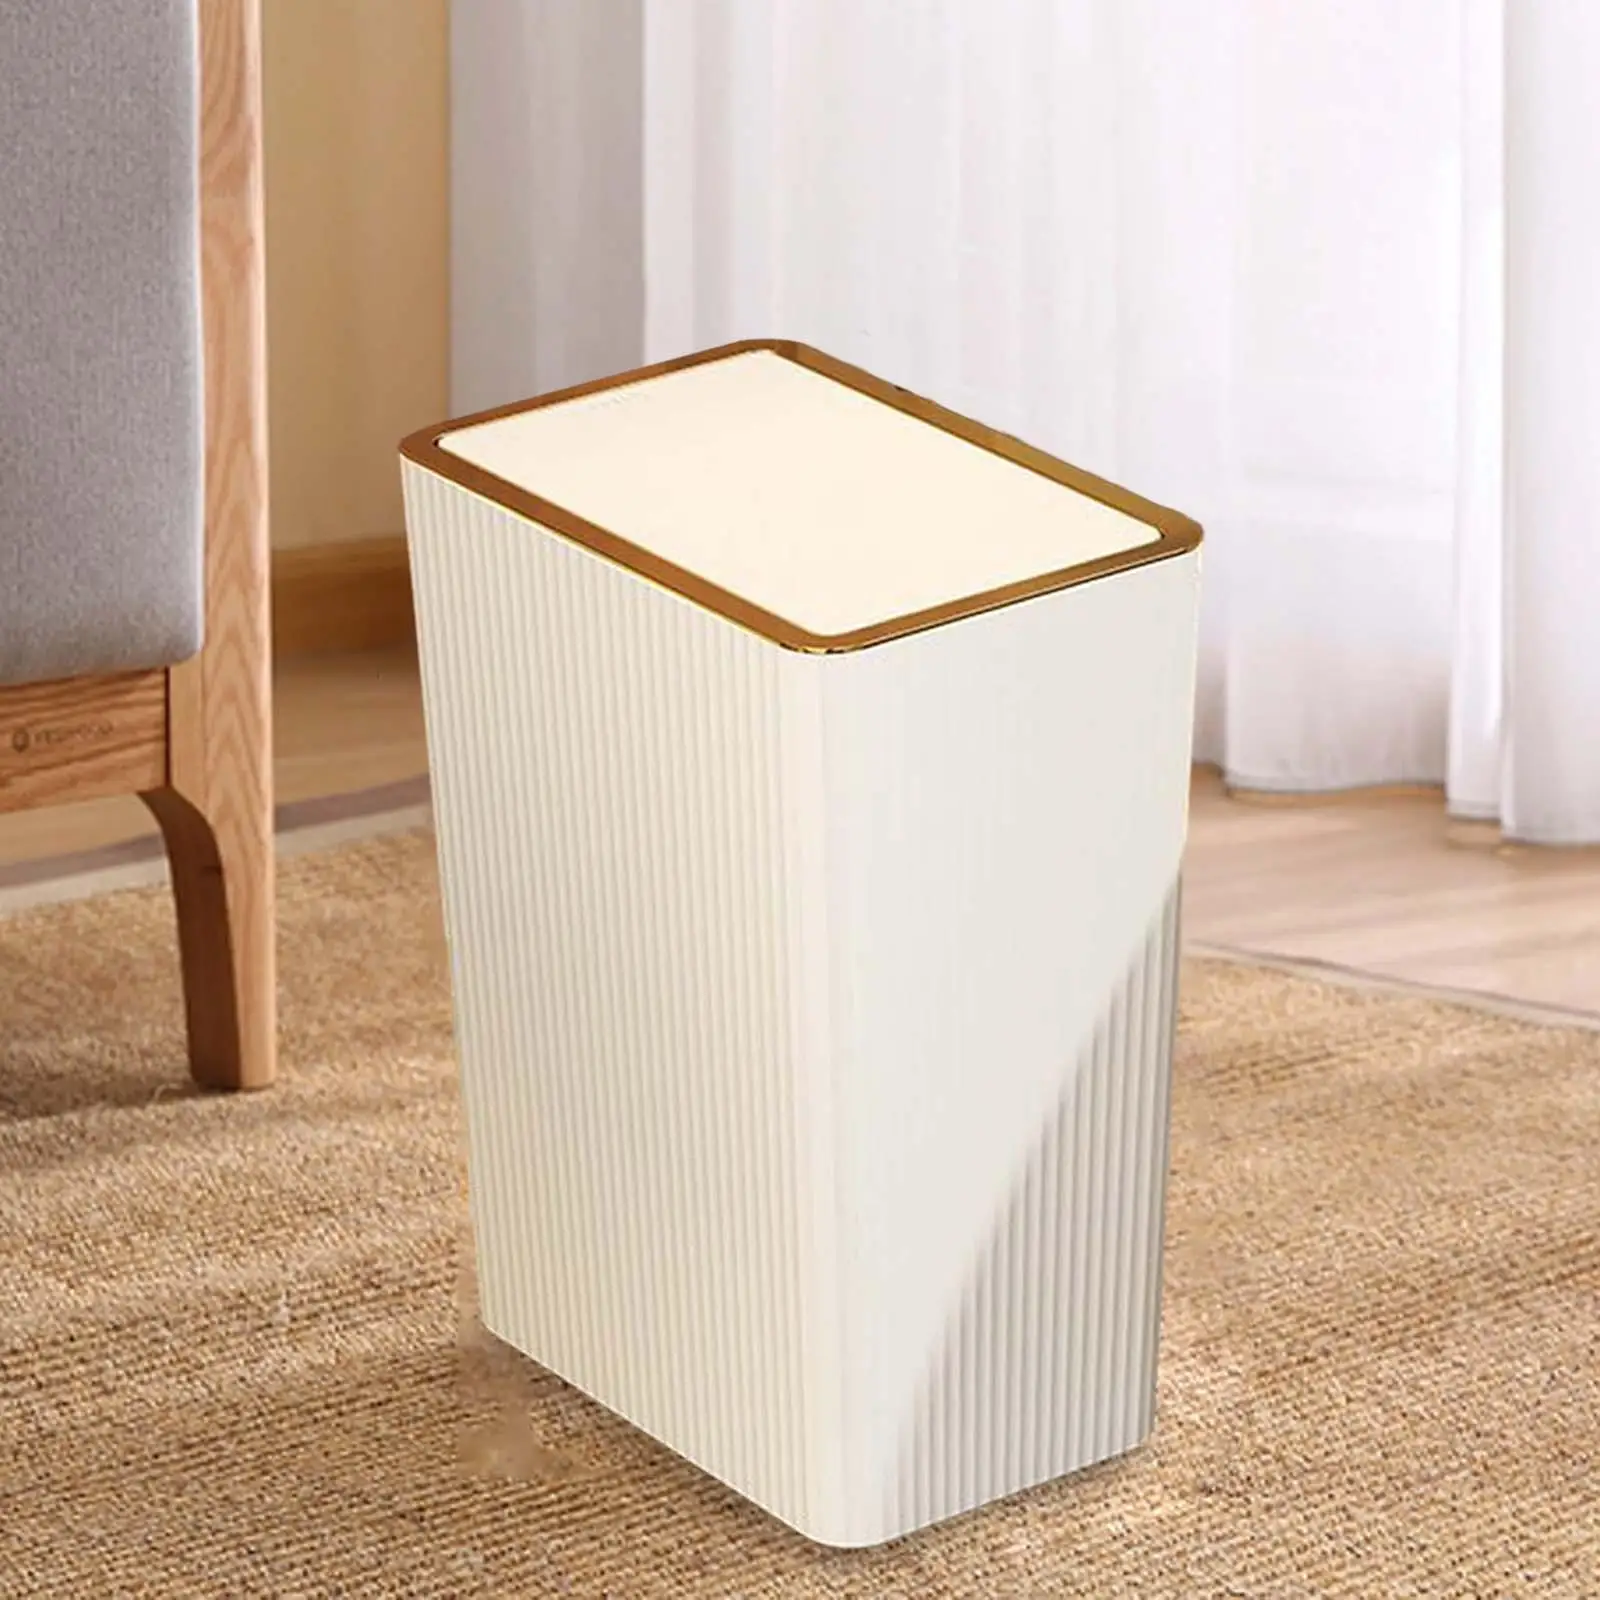 Bathroom Trash Can with Lids Stylish Design Nordic Dustbin Slim Narrow Garbage Can for Laundry Room Living Entryway Garage